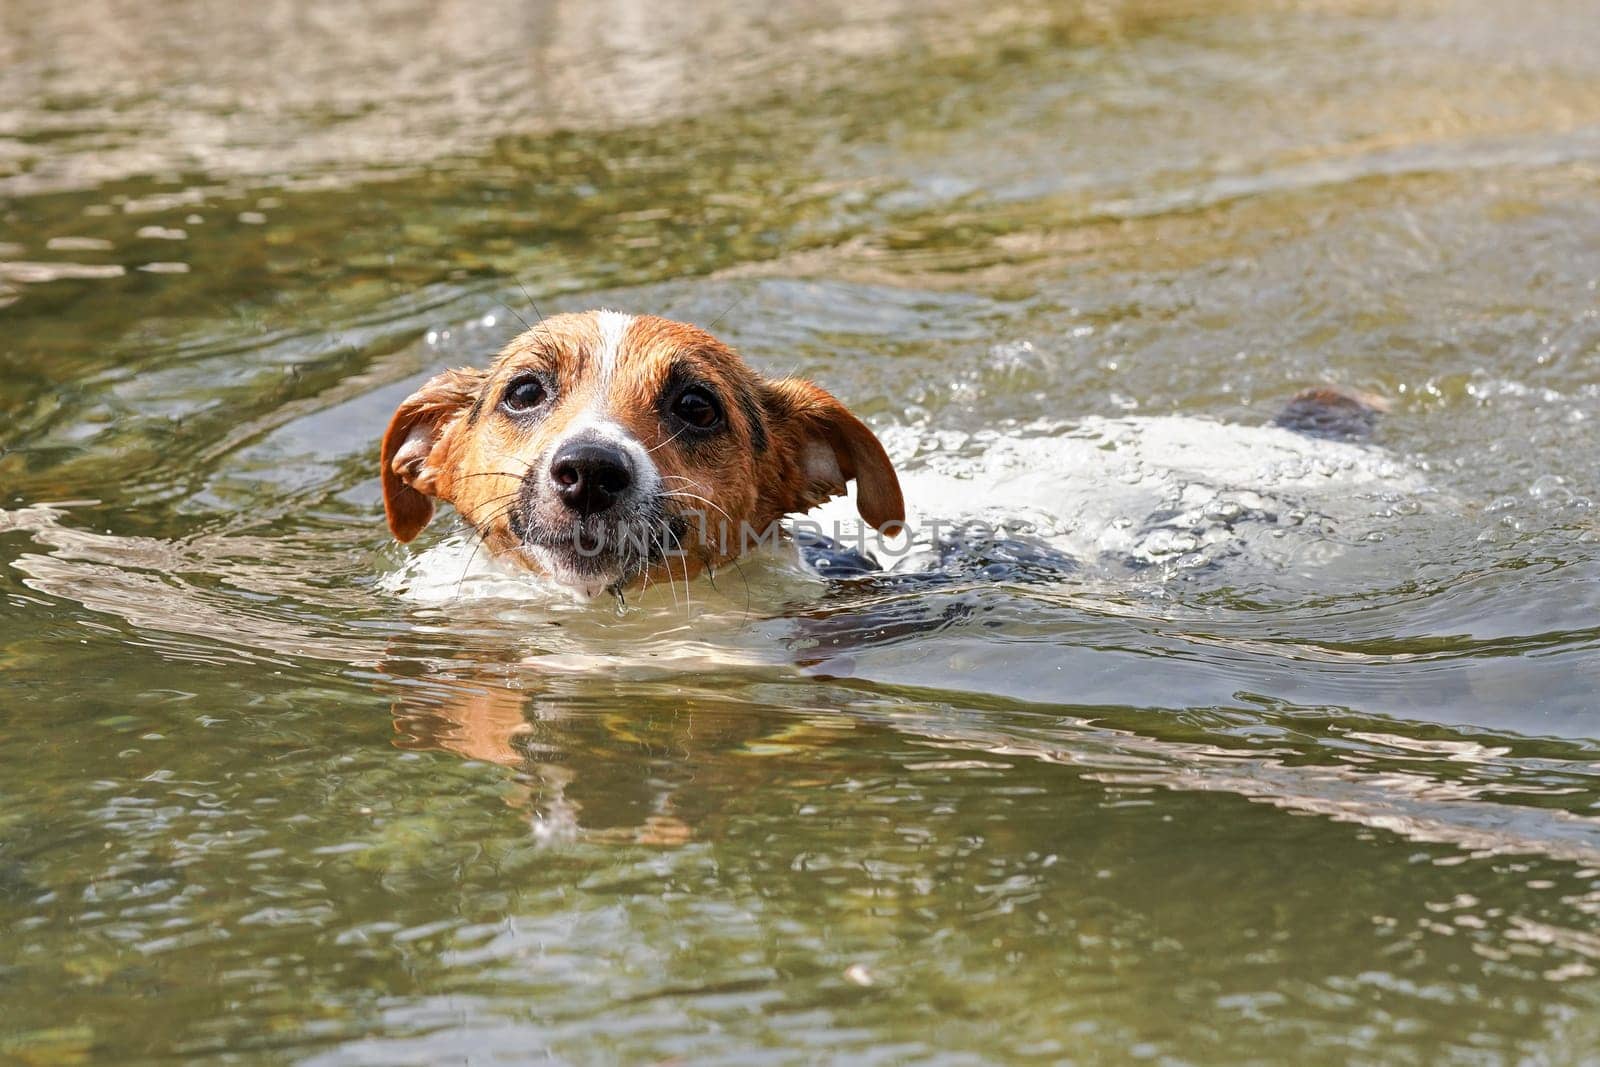 Jack Russell terrier swimming in water on sunny day, closeup on her head visible above water